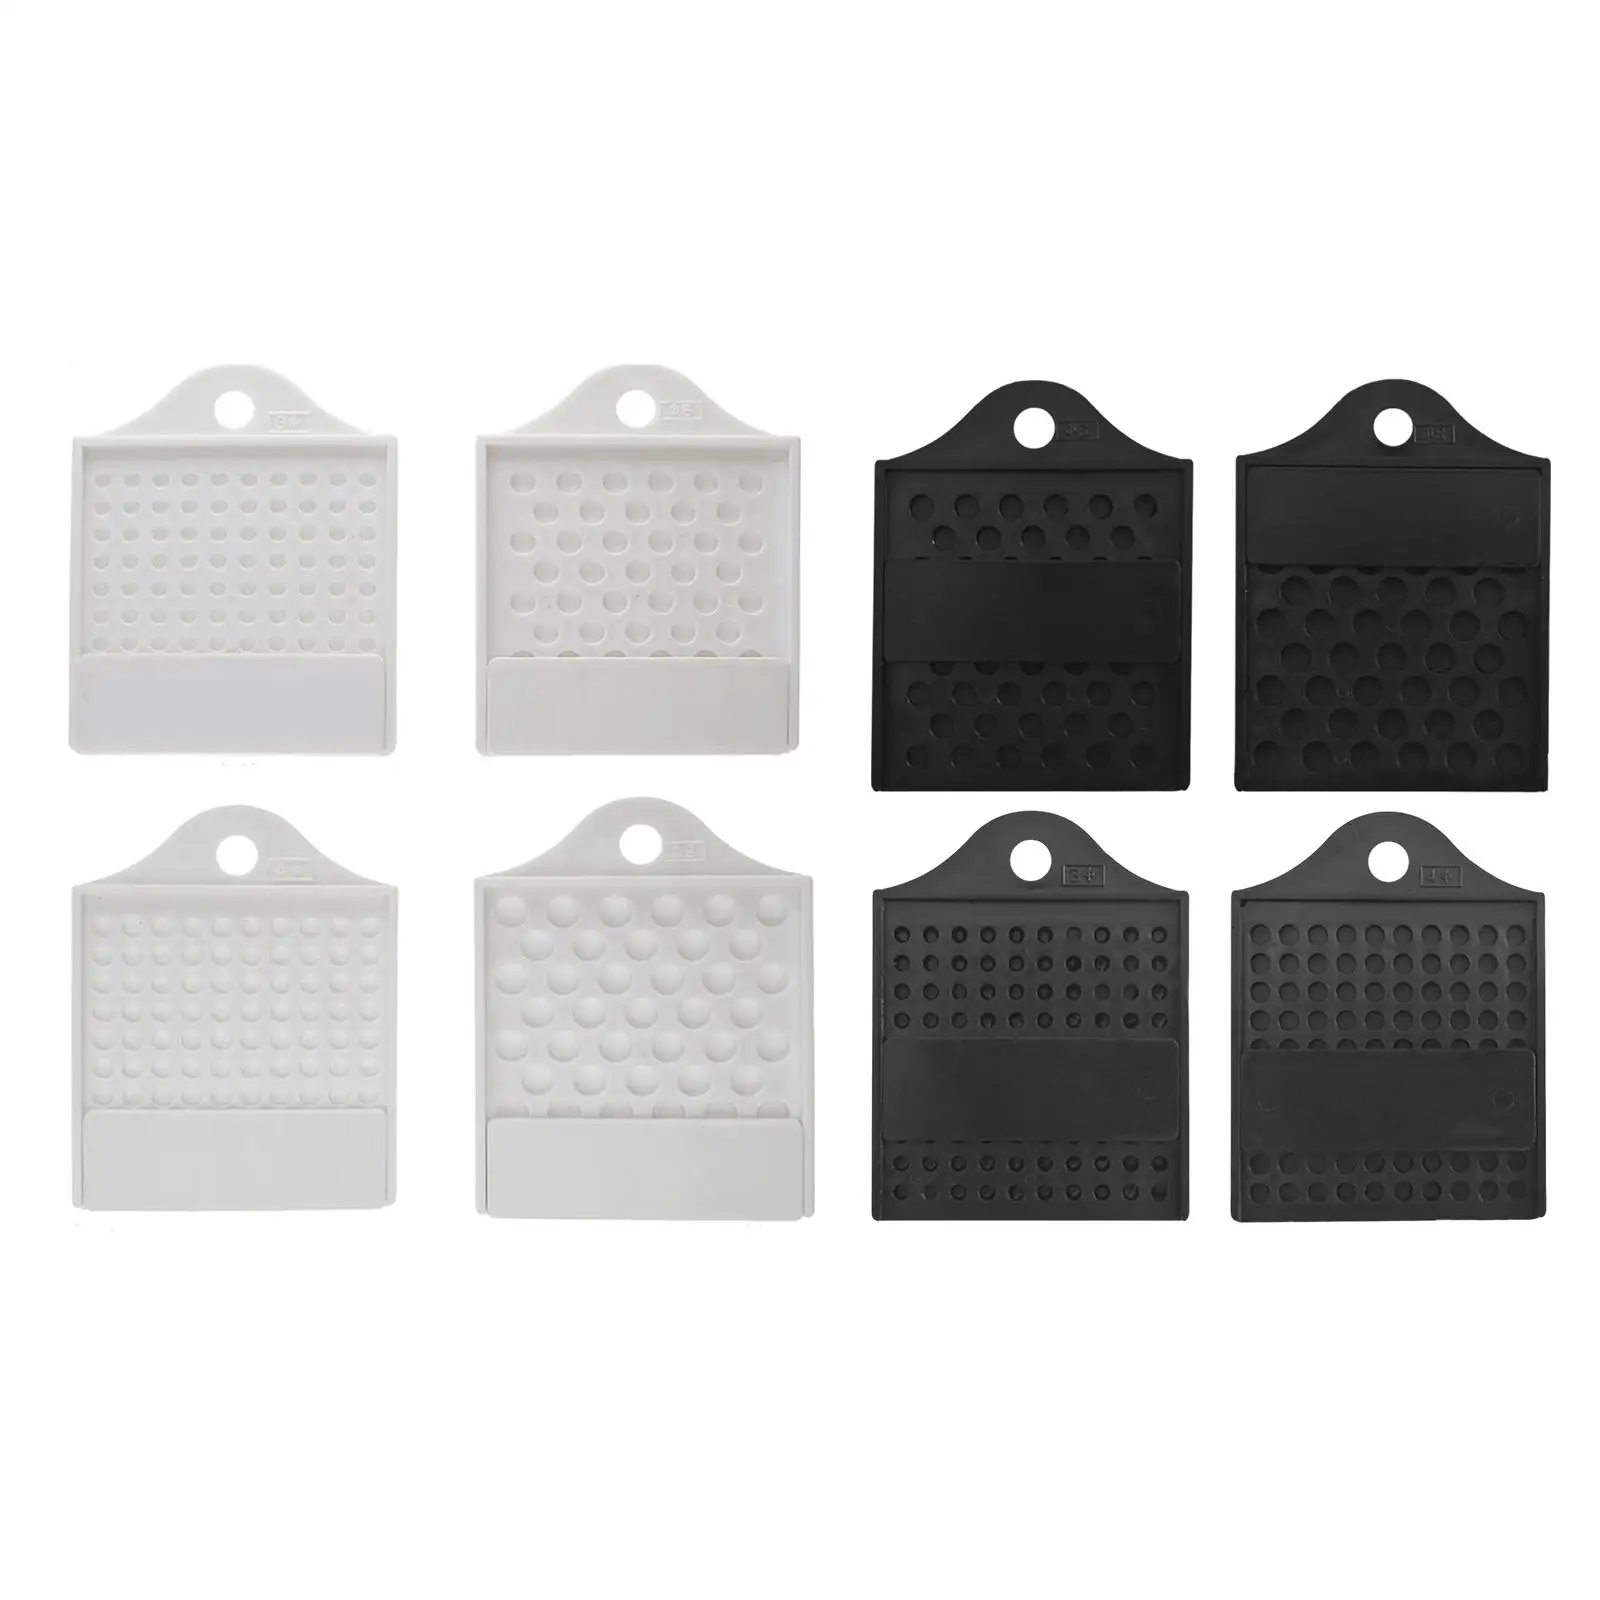 

4x Beading Board for Jewelry Crafts 3/4/6/8mm Sort Practical Bead Tray Portable Storage Container DIY Bead Counter Beading Board